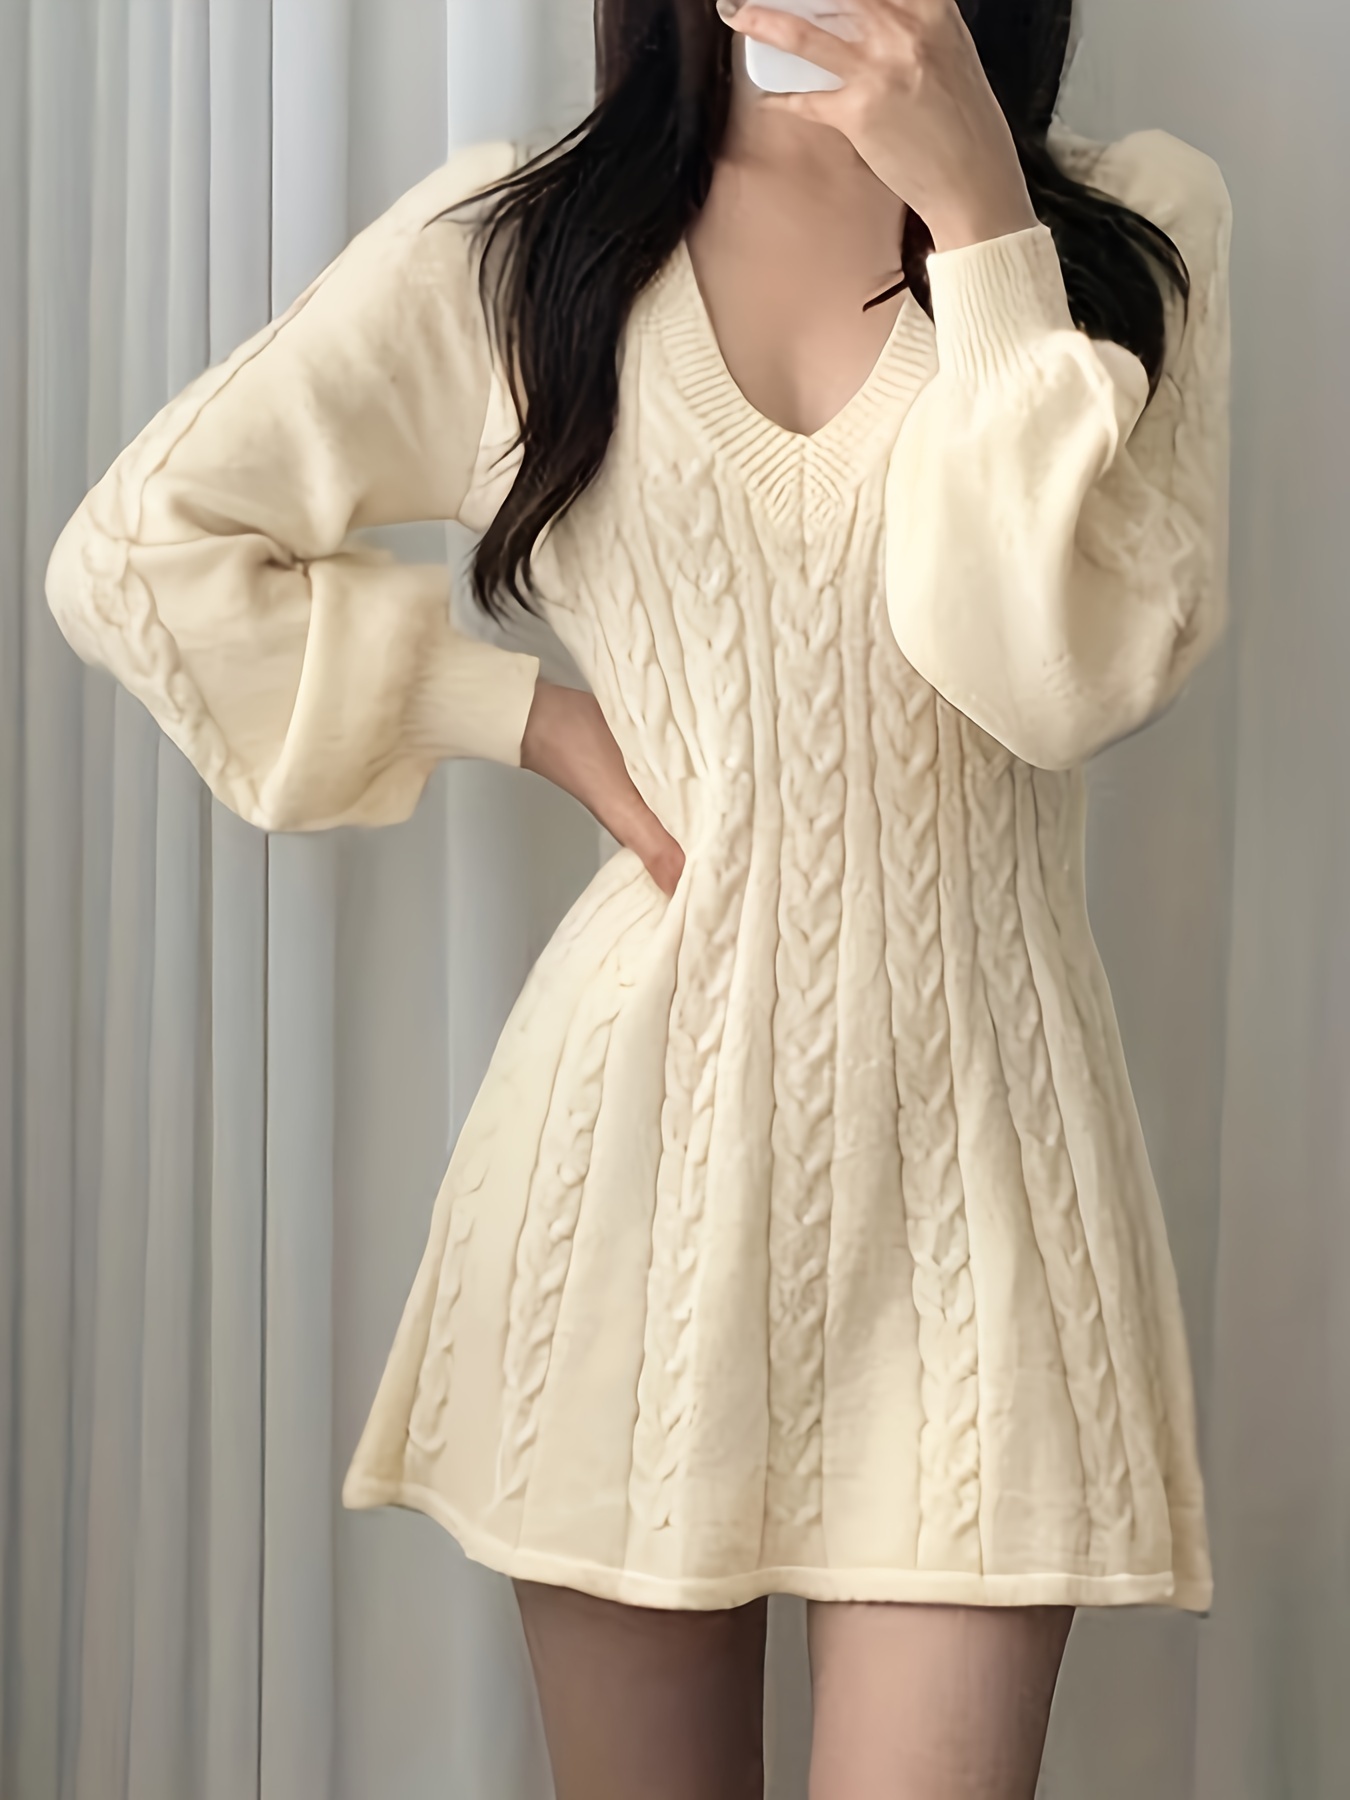 solid cable v neck sweater dress casual long sleeve a line dress womens clothing details 3